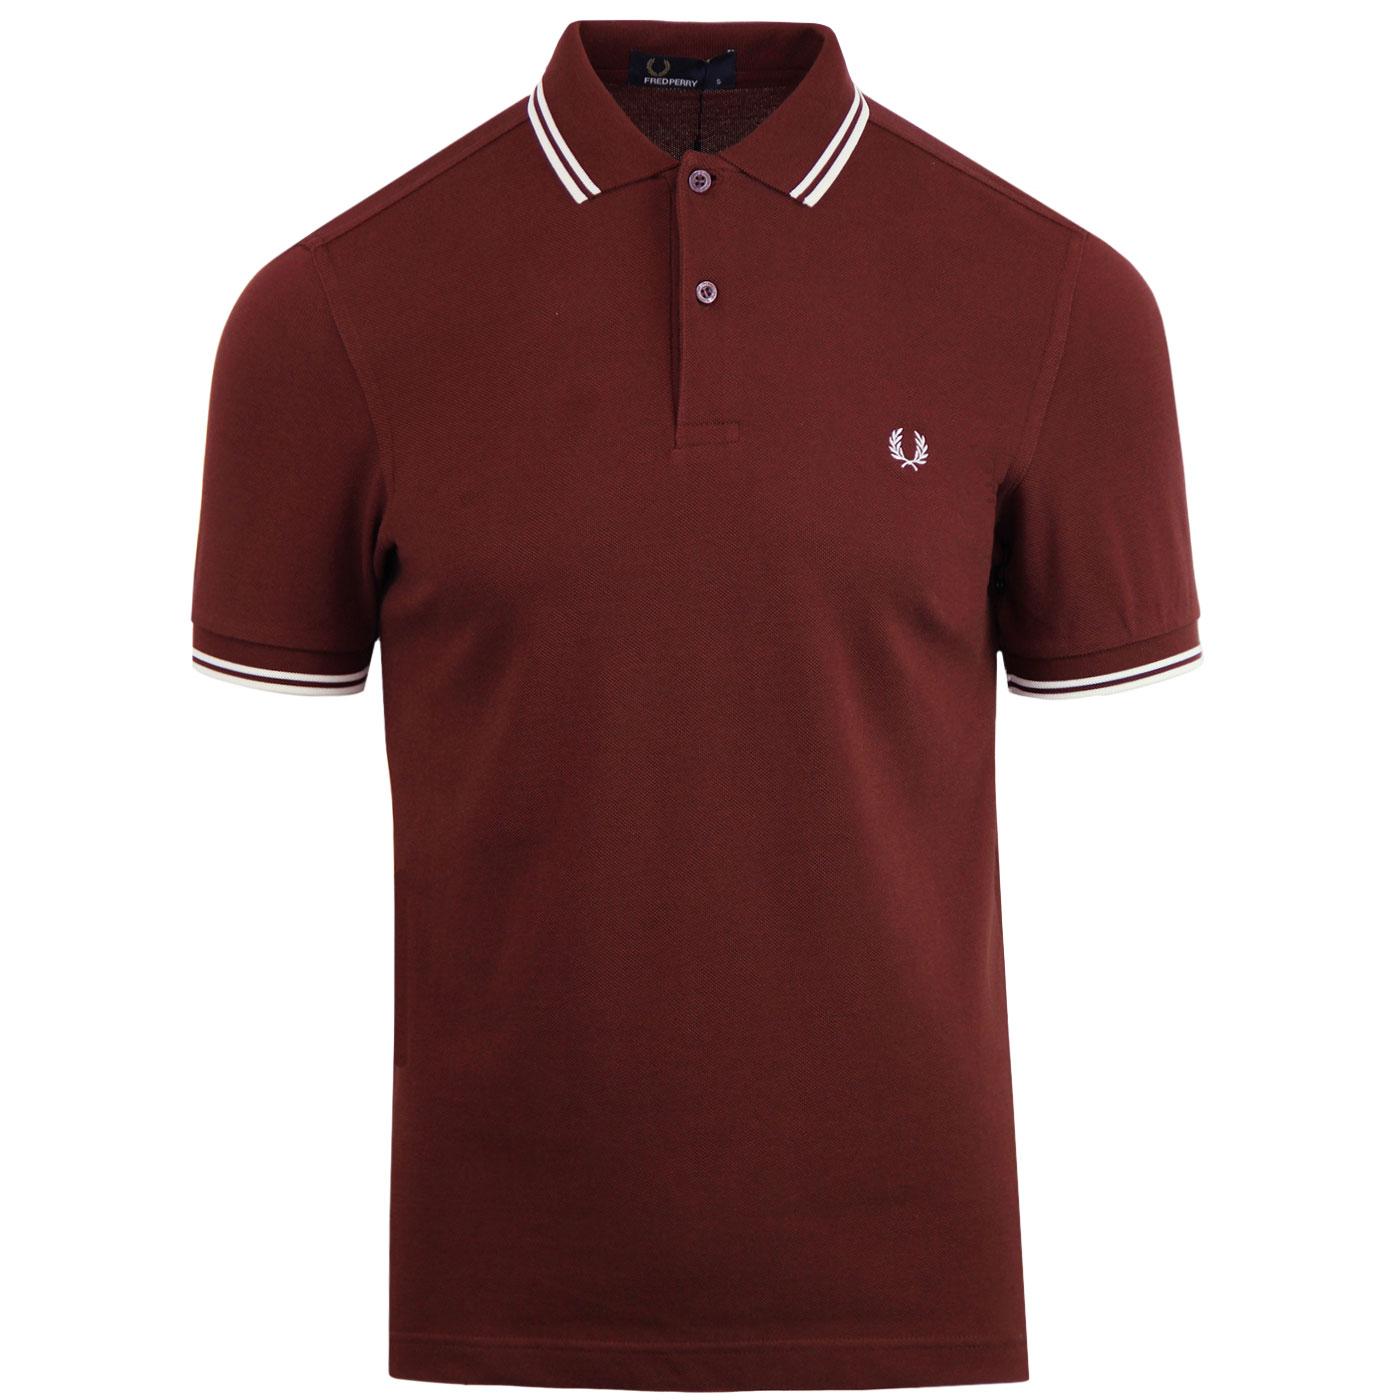 FRED PERRY M3600 Mod Twin Tipped Polo Shirt (SR)